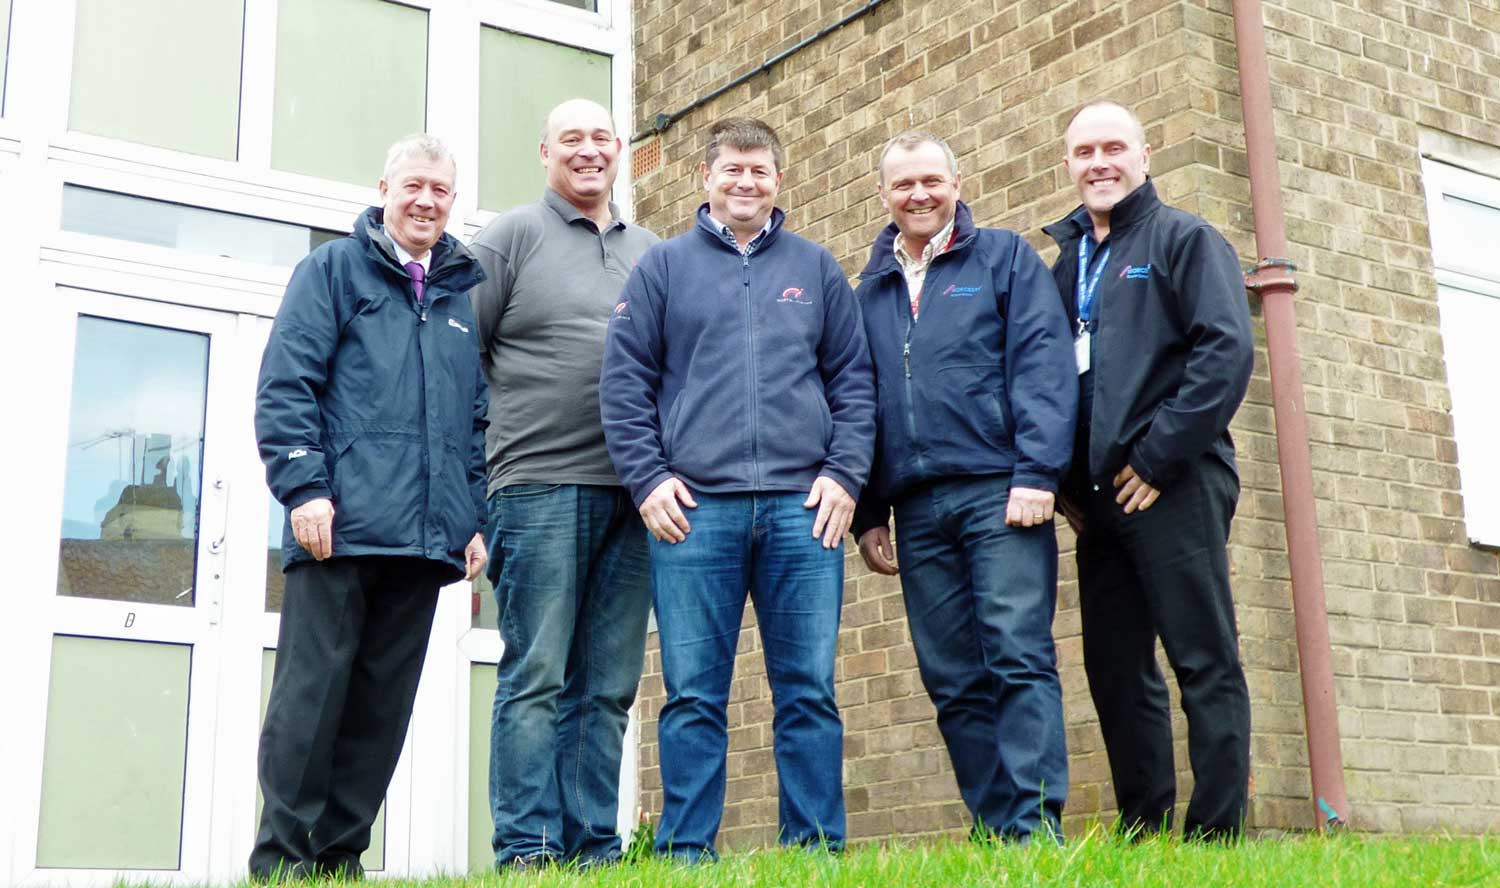 (L-R) Councillor Mike Chambers with maintenance contractors Alistair Symonds (Walter Hartley Ltd), Steven Hepworth (Norton Interiors Ltd), and John Ebbs and Kevin O’Donovan (Help-link UK Ltd), outside the flats on Ripon’s Allhallowgate